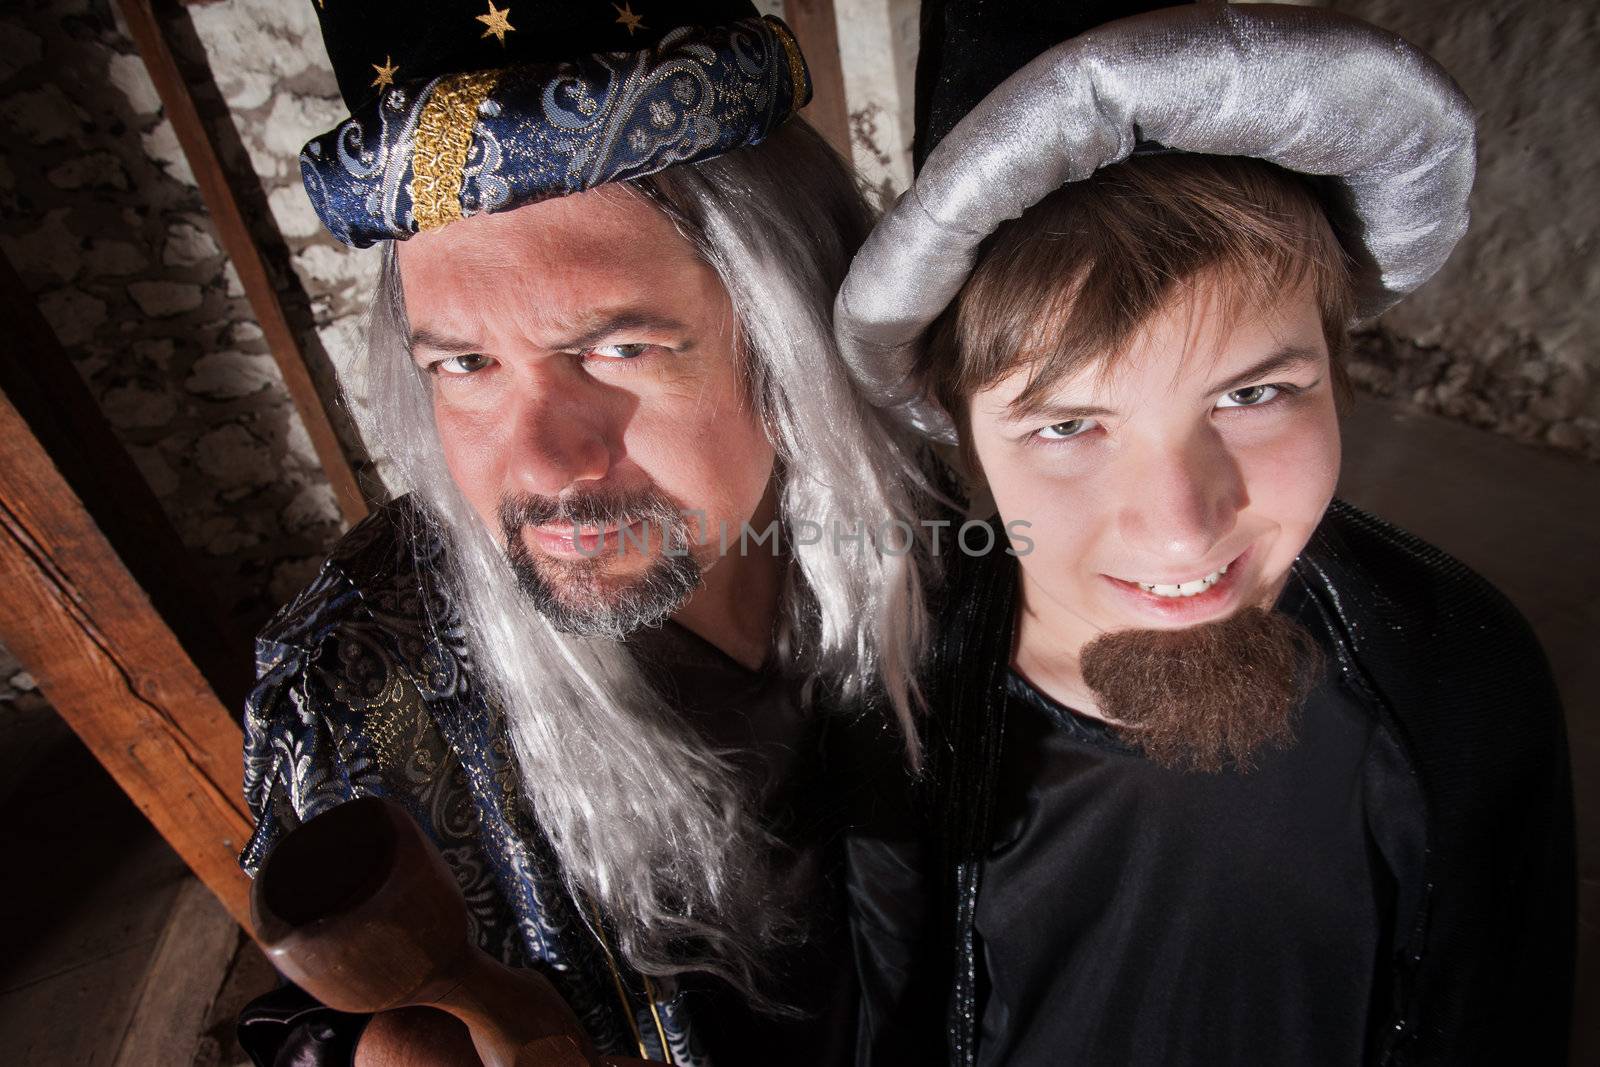 Caucasian father and son wizards standing next to each other